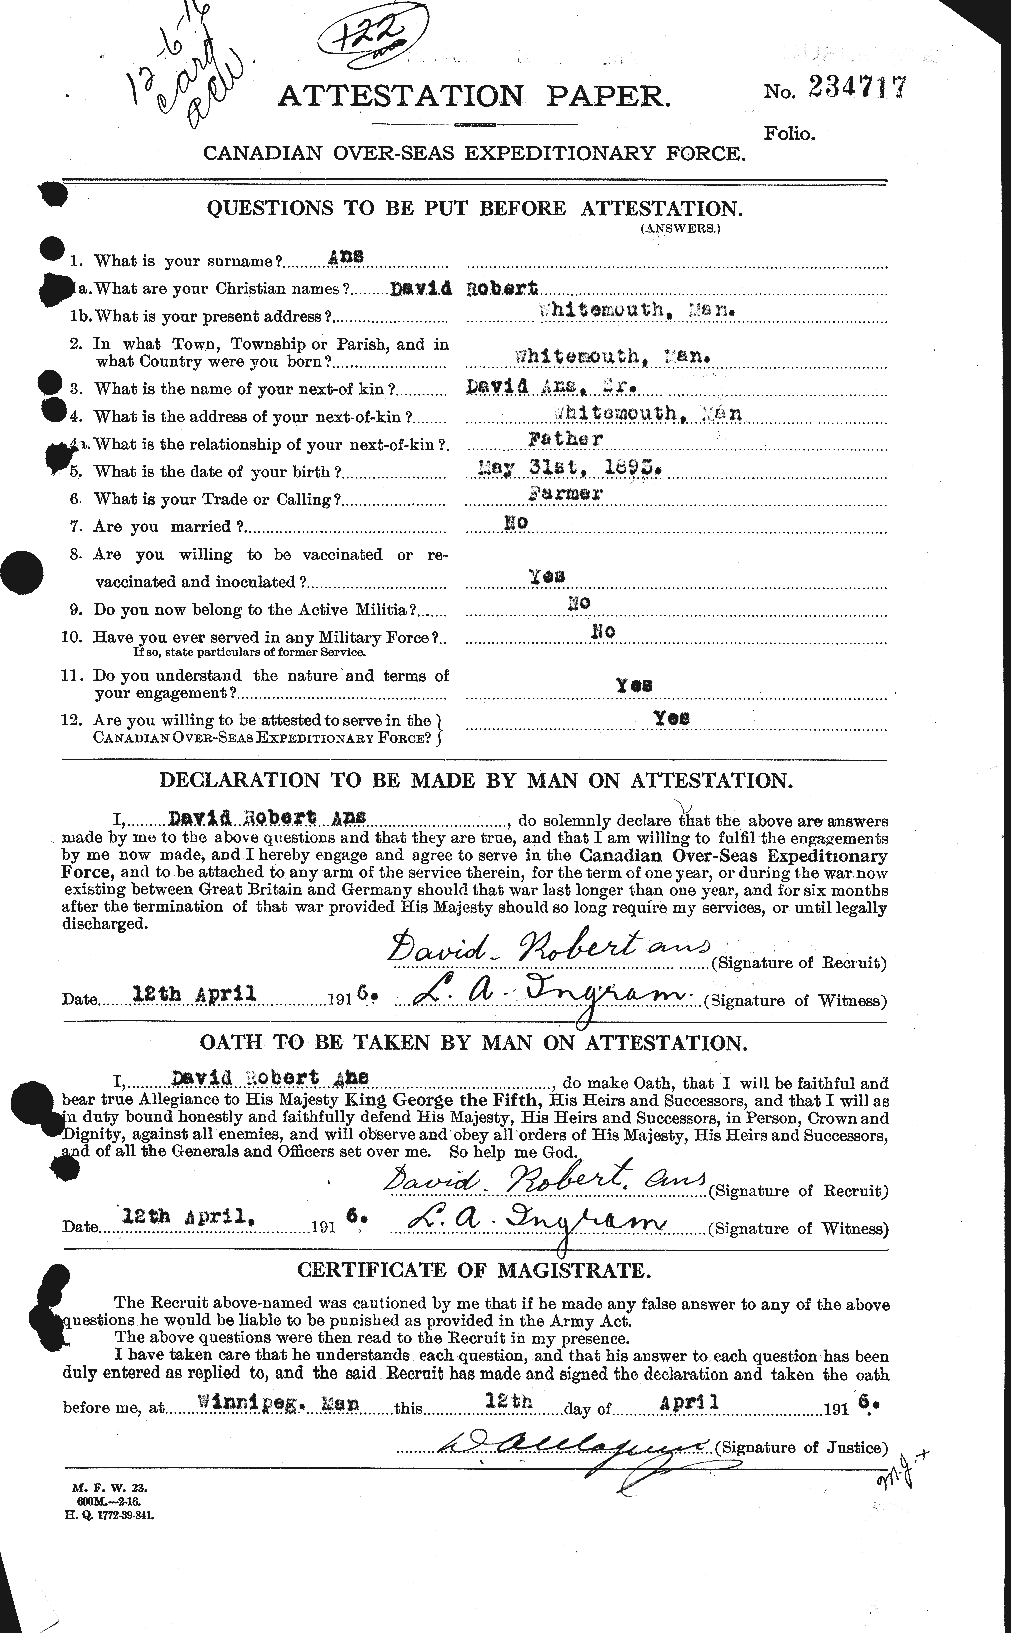 Personnel Records of the First World War - CEF 212369a